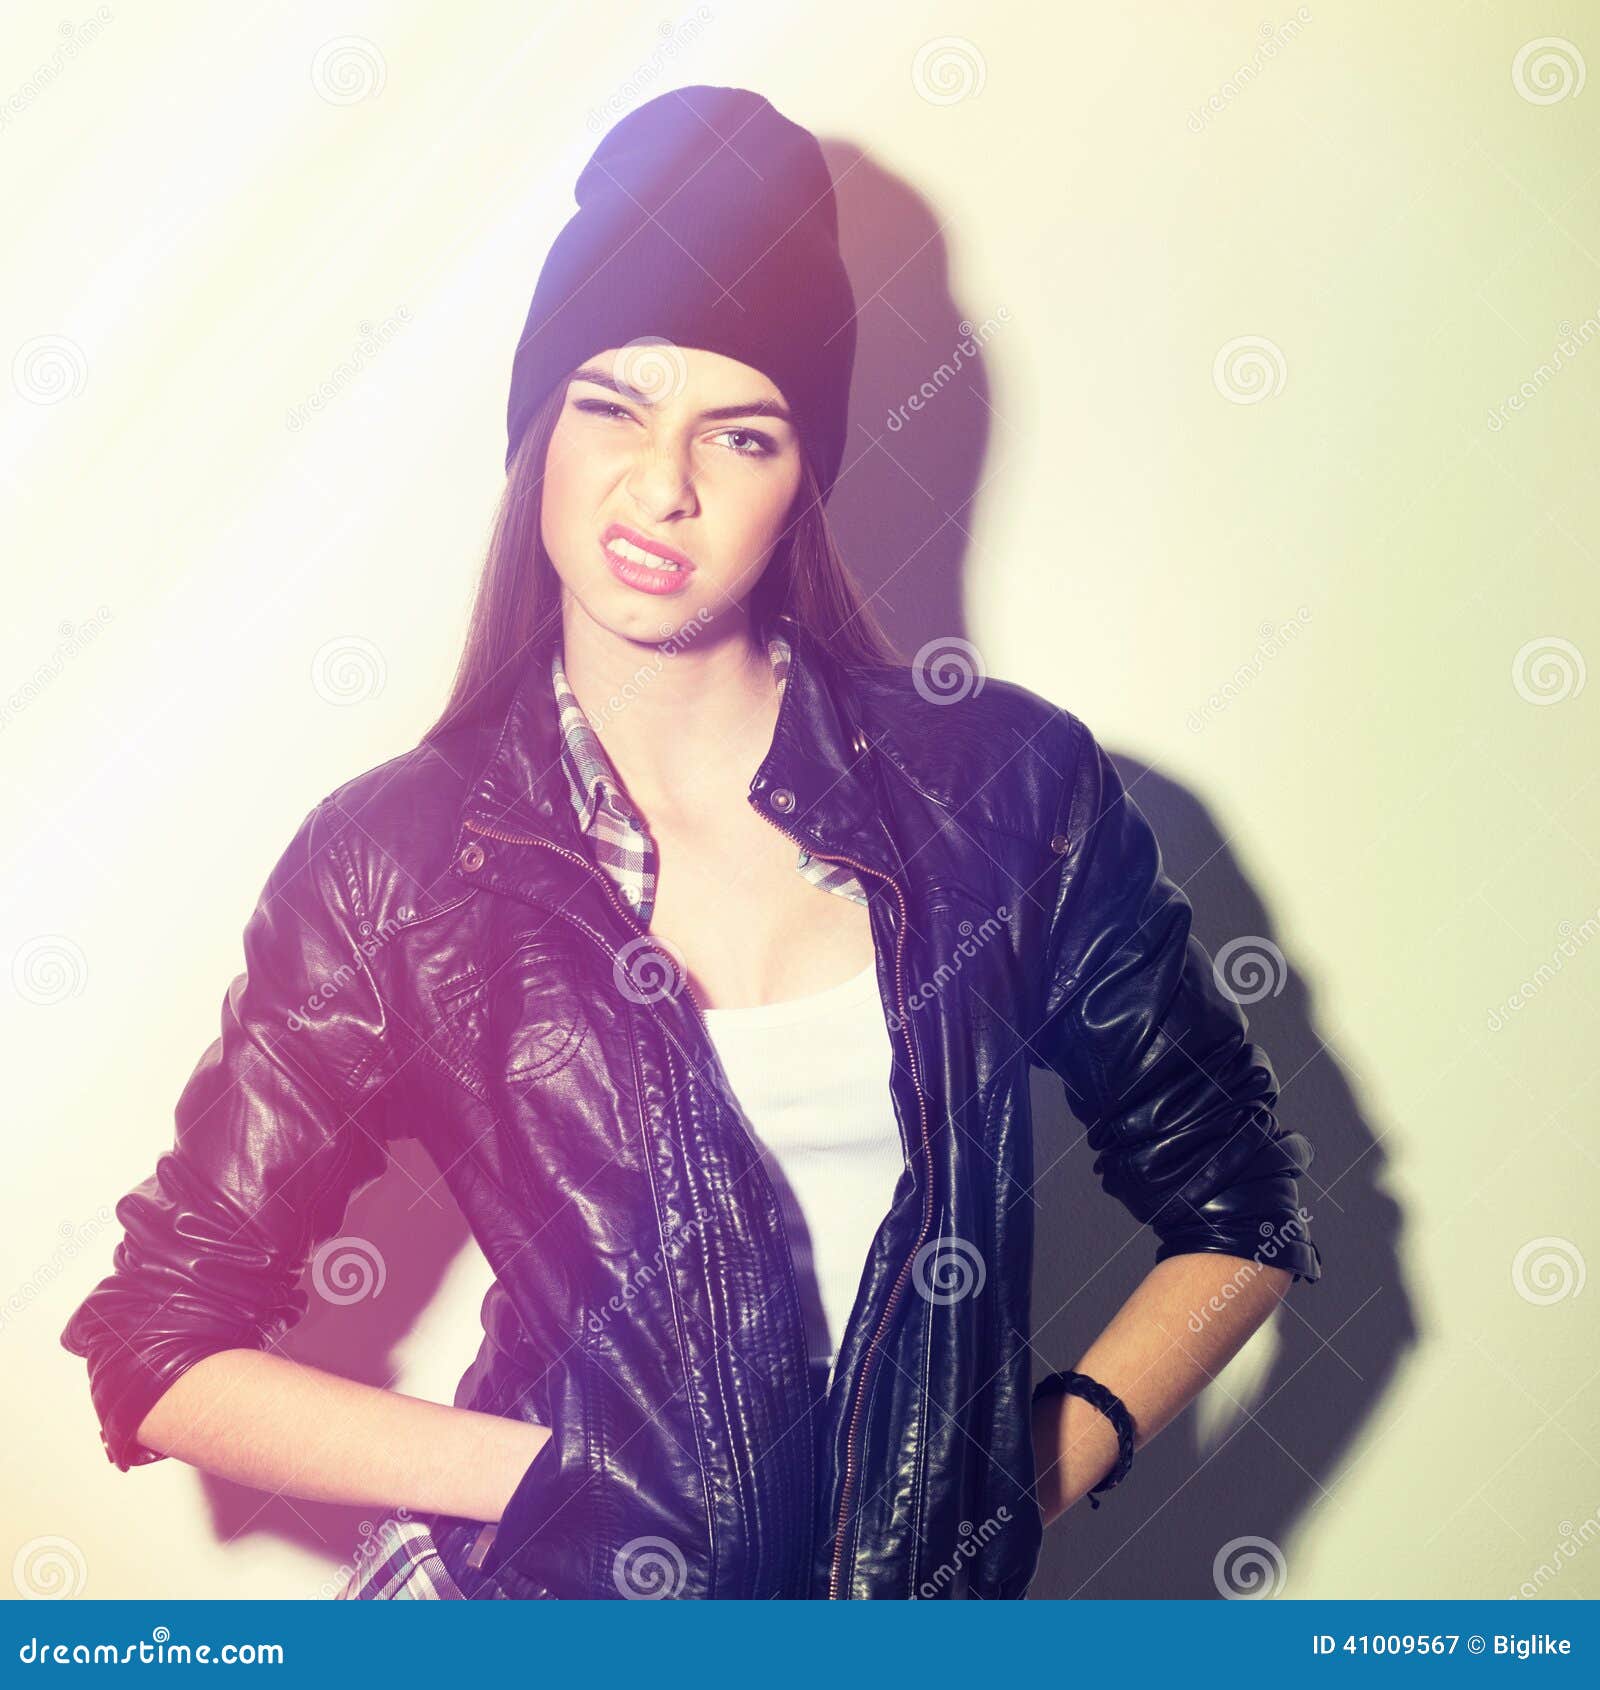 Hipster Girl with Beanie Hat Showing Attitude Stock Image - Image ...